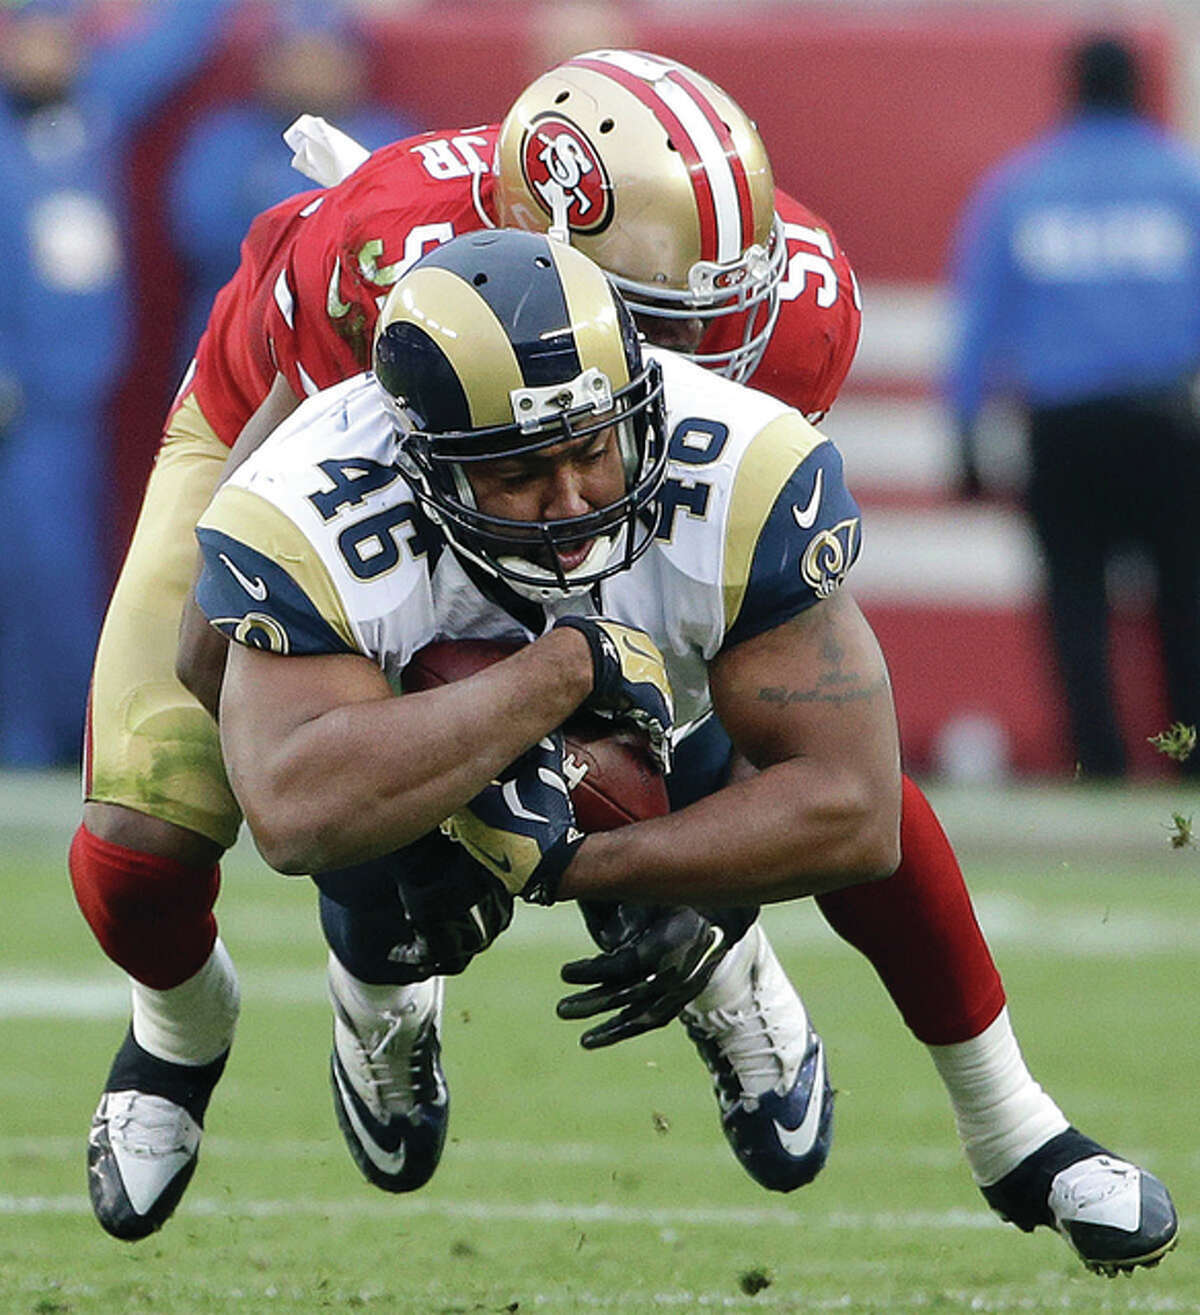 Rams tight end Cory Harkey (46) is tackled by 49ers linebacker Gerald Hodges during the second half Sunday in Santa Clara, Calif.